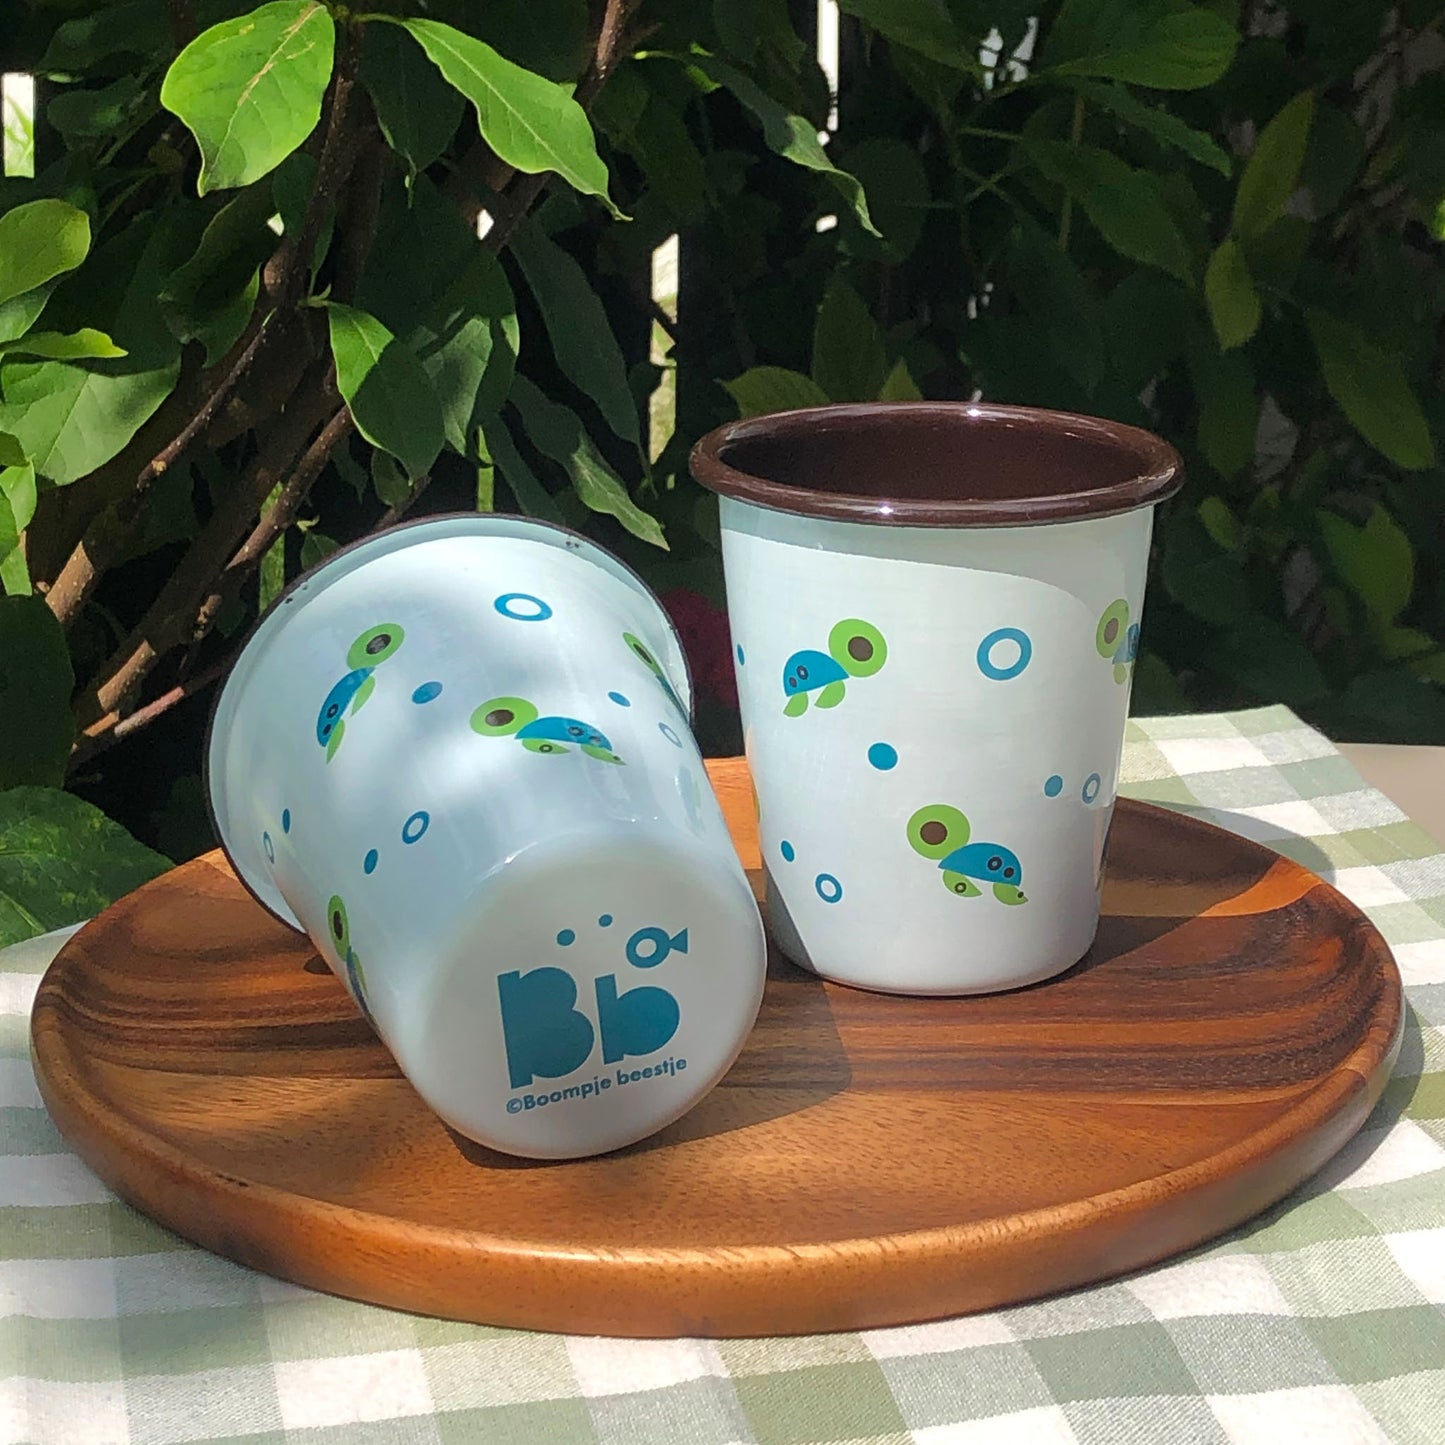 Blue drinking cups with sea turtle design sits on a platter outside in a garden.